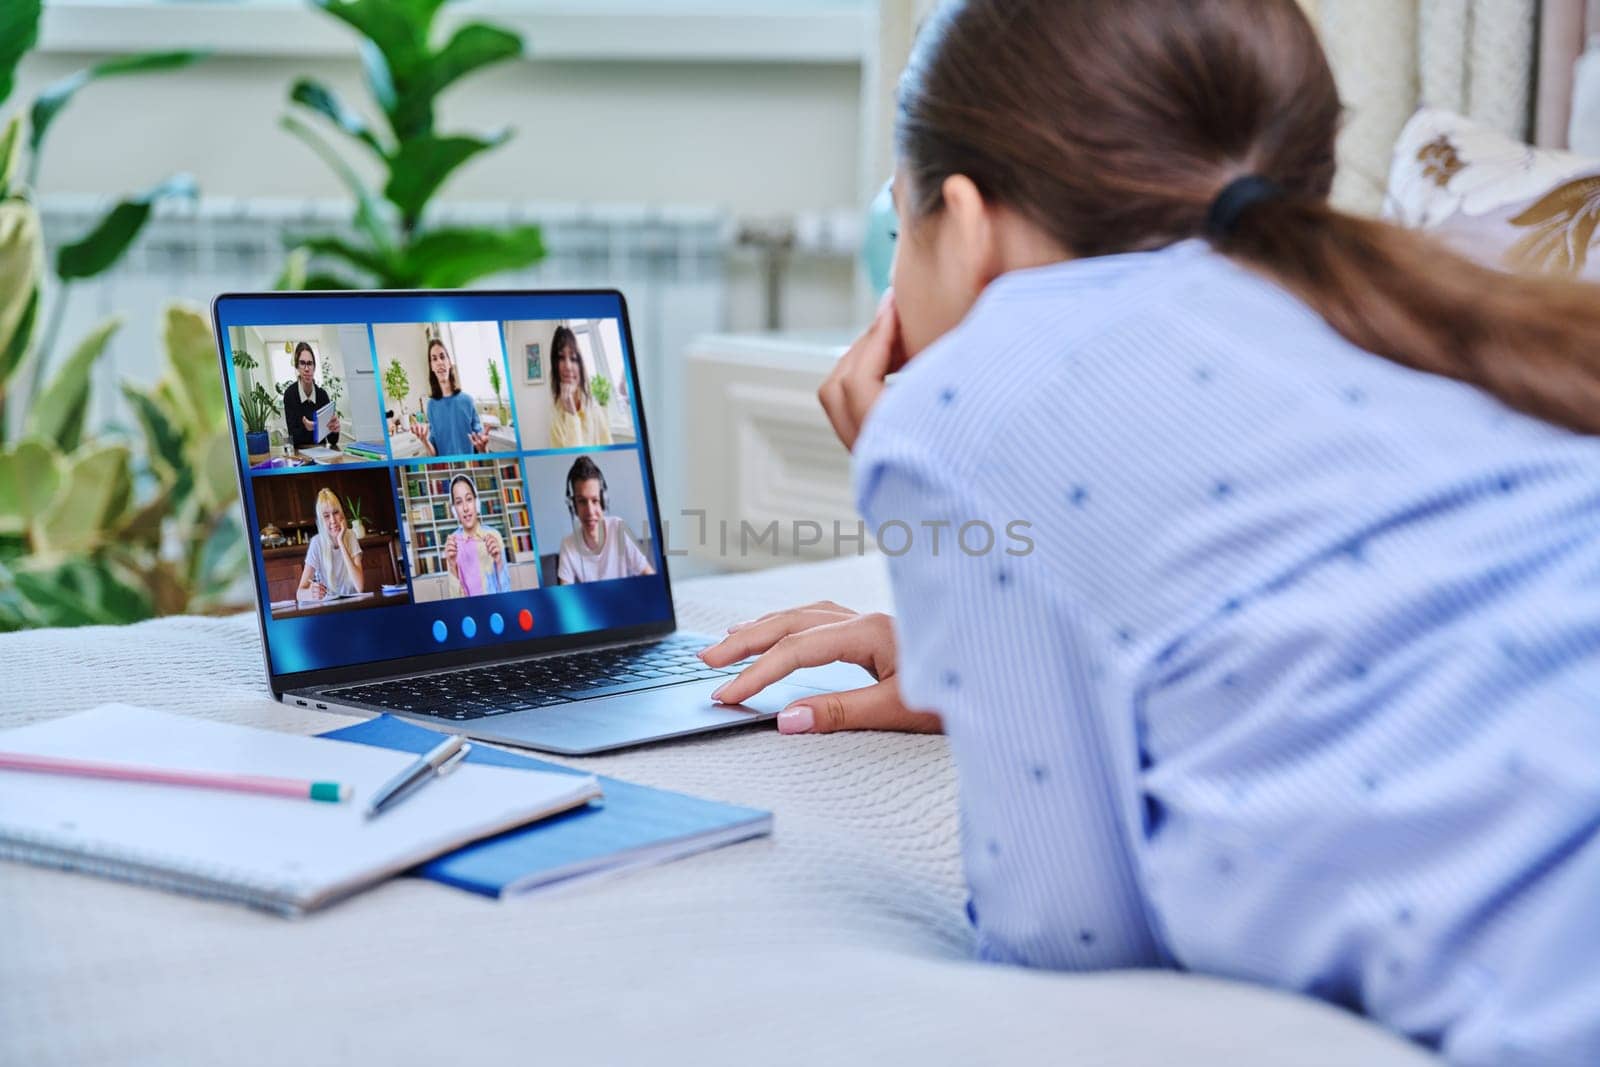 Video conference, teen girl looking at laptop screen with group of students by VH-studio